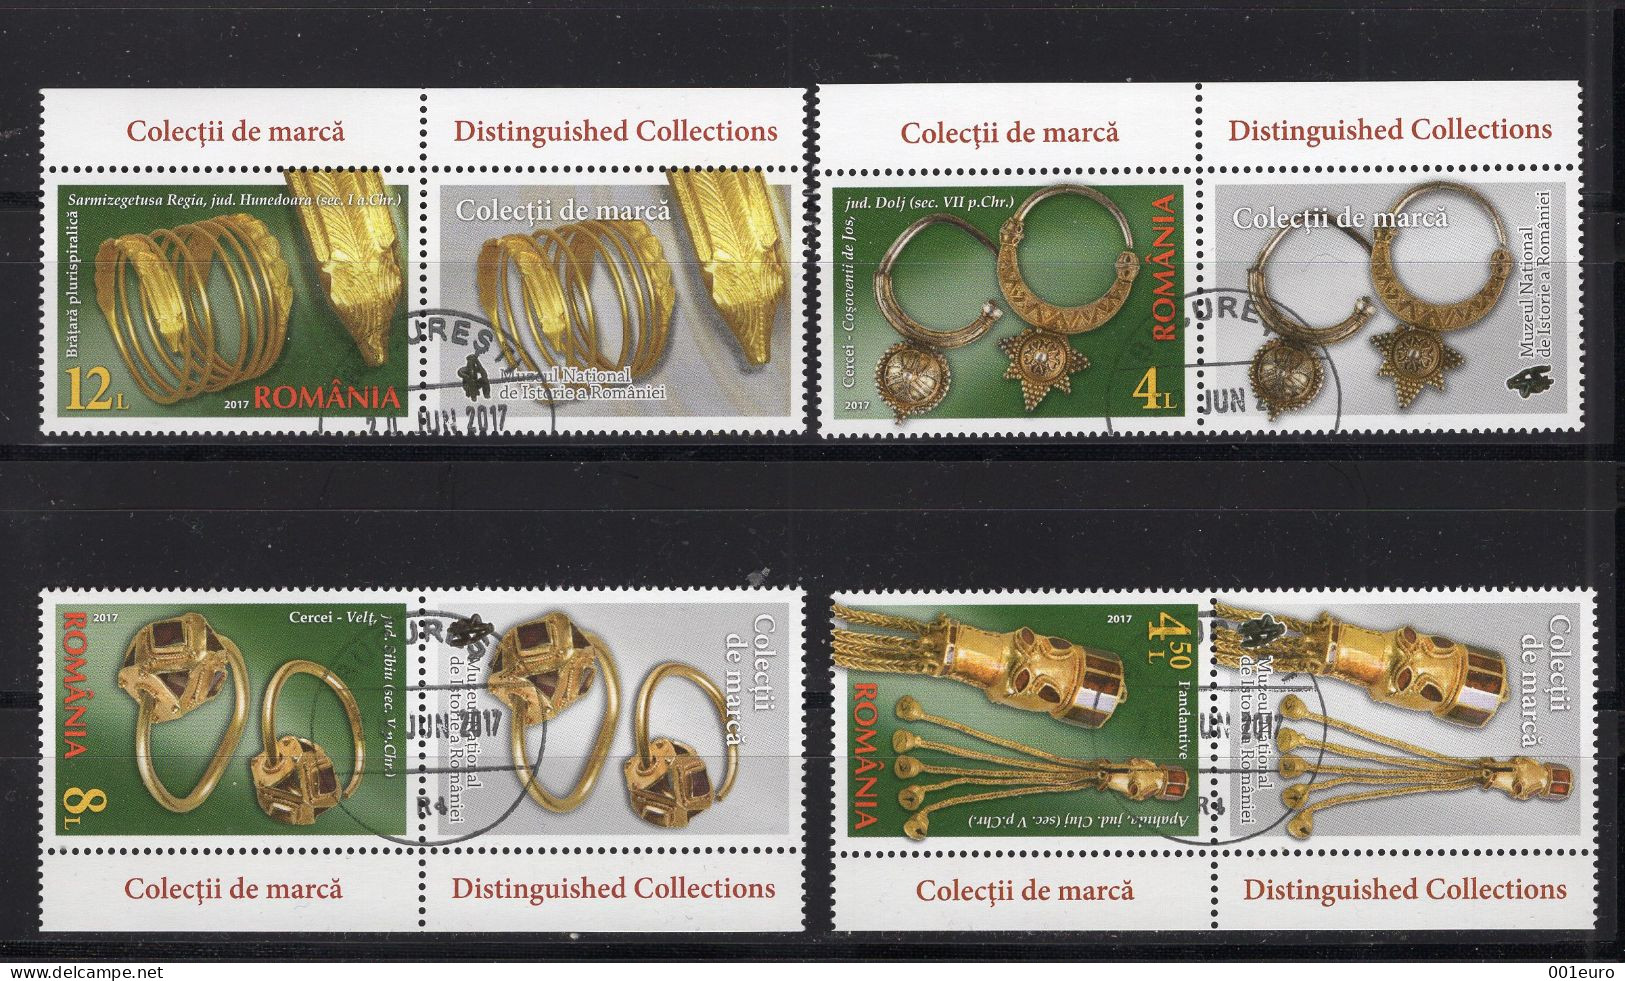 ROMANIA 2017: DISTINGUISHED COLLECTIONS, Set Of 4 Used Stamps + Vignettes - Registered Shipping! - Gebraucht